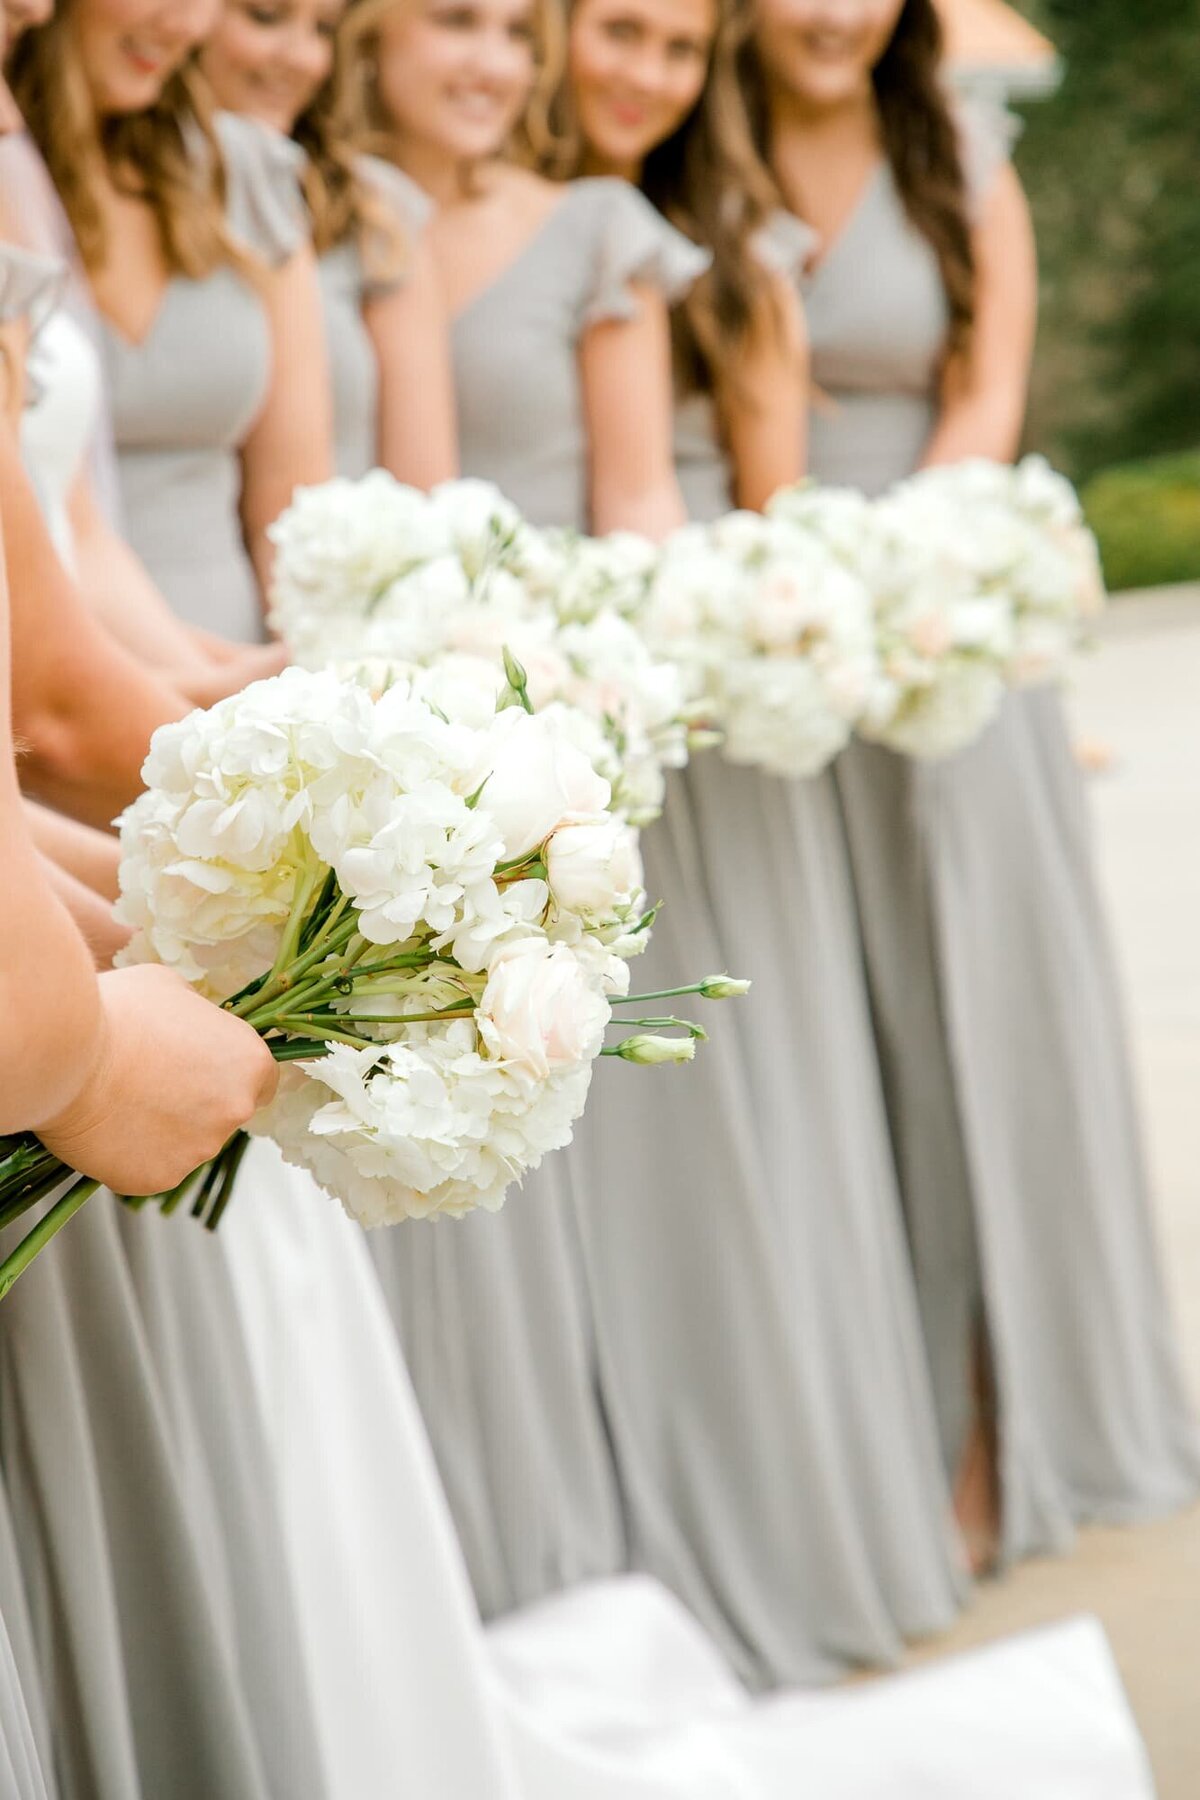 Bridesmaids in gray dresses with white bouquets